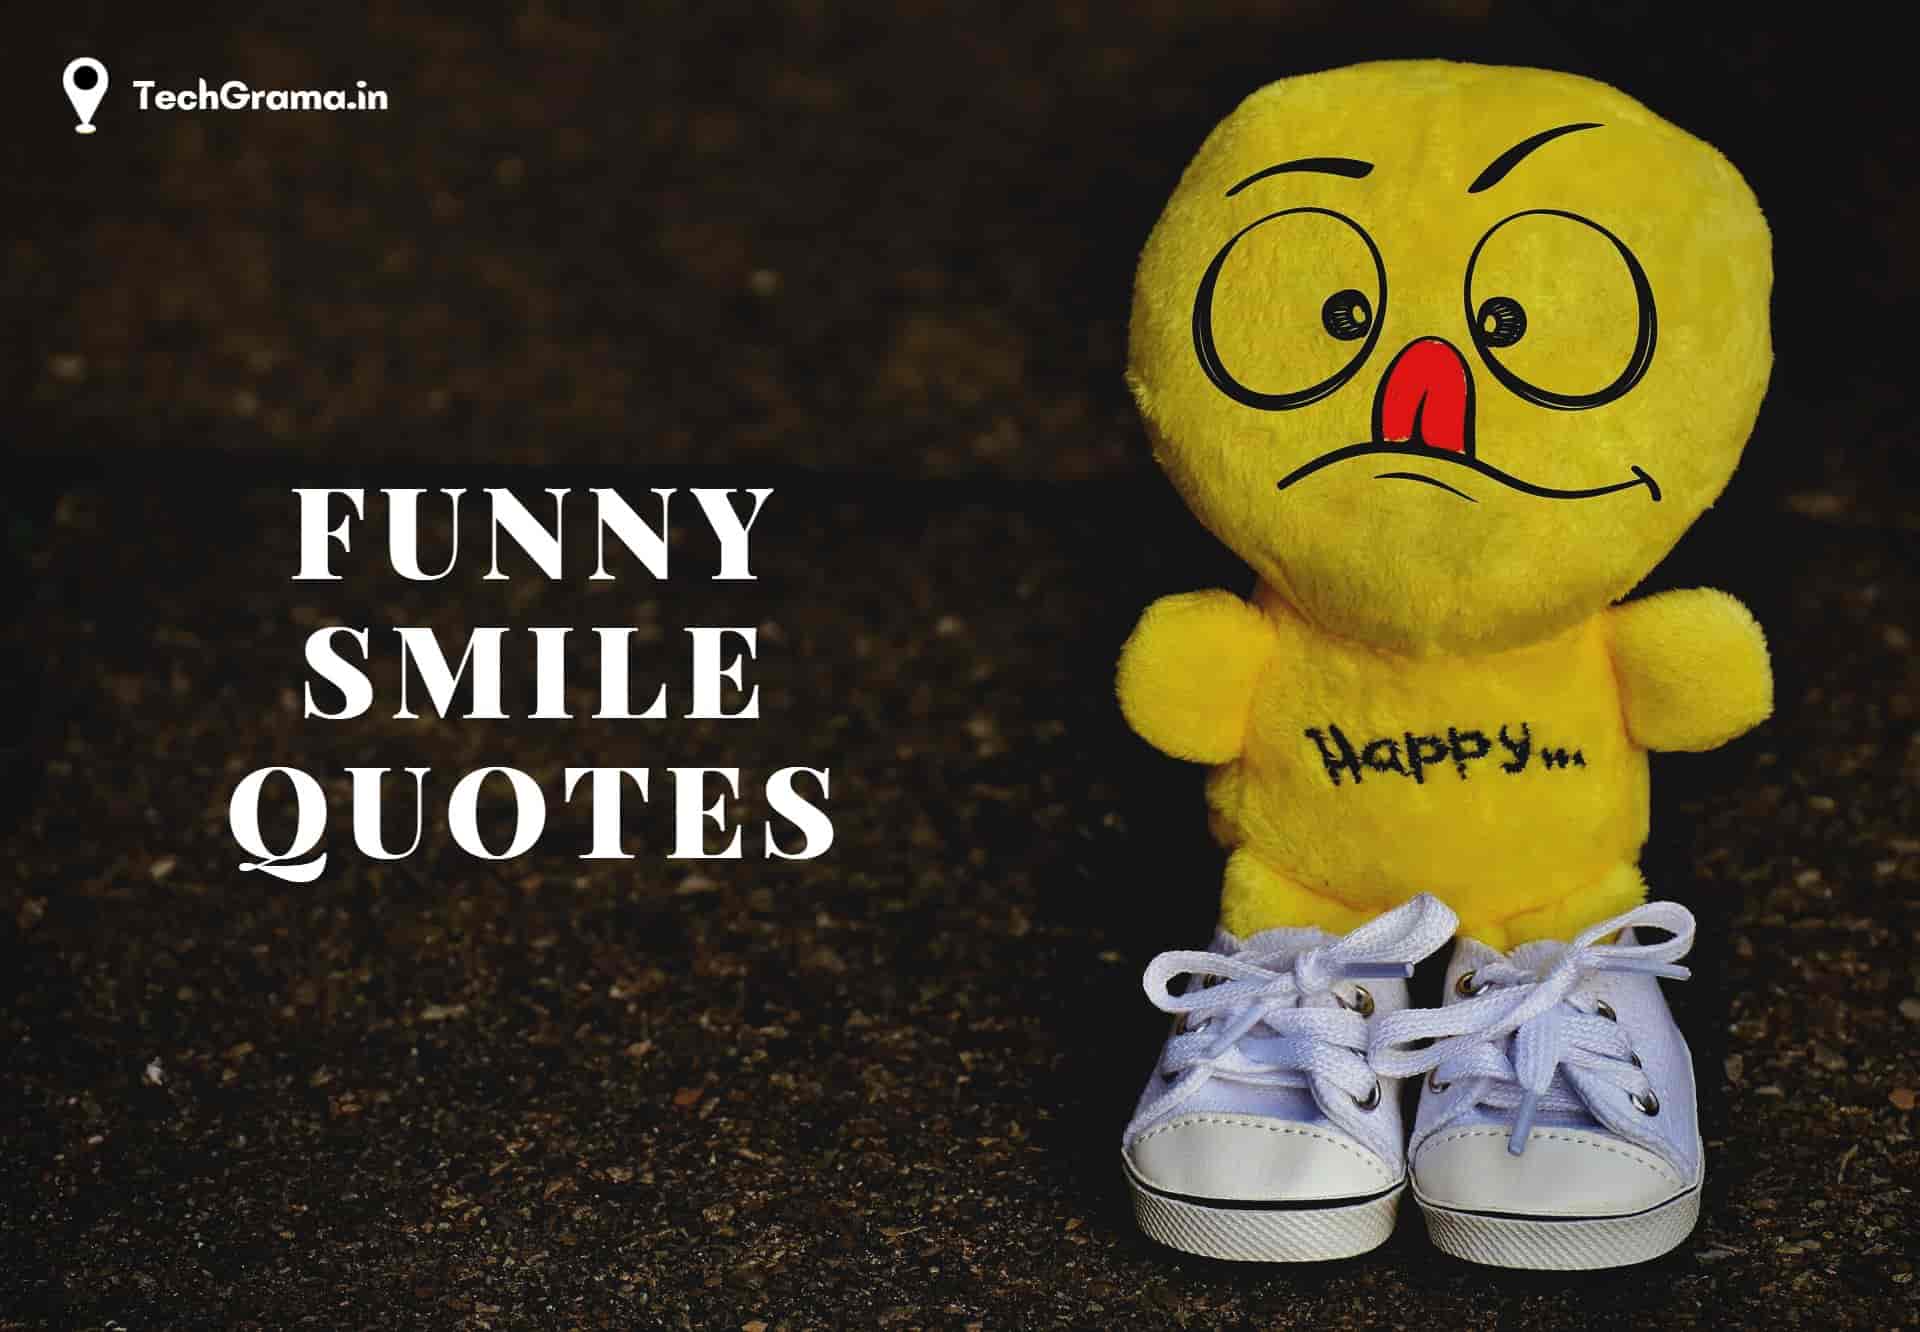 Best Funny Smile Quotes And Captions, Funny Smile Quotes For Instagram, Funny Captions on Smile, Funny Quotes For Smile, Funny Quotes to Make Someone Smile, Funny Quotes on Smile, Funny Captions on Smile For Instagram, Funny Quotes to Make You Smile, Funny Smile Quotes That Make You Laugh, Funny Smile Quotes For Boys & Girls.